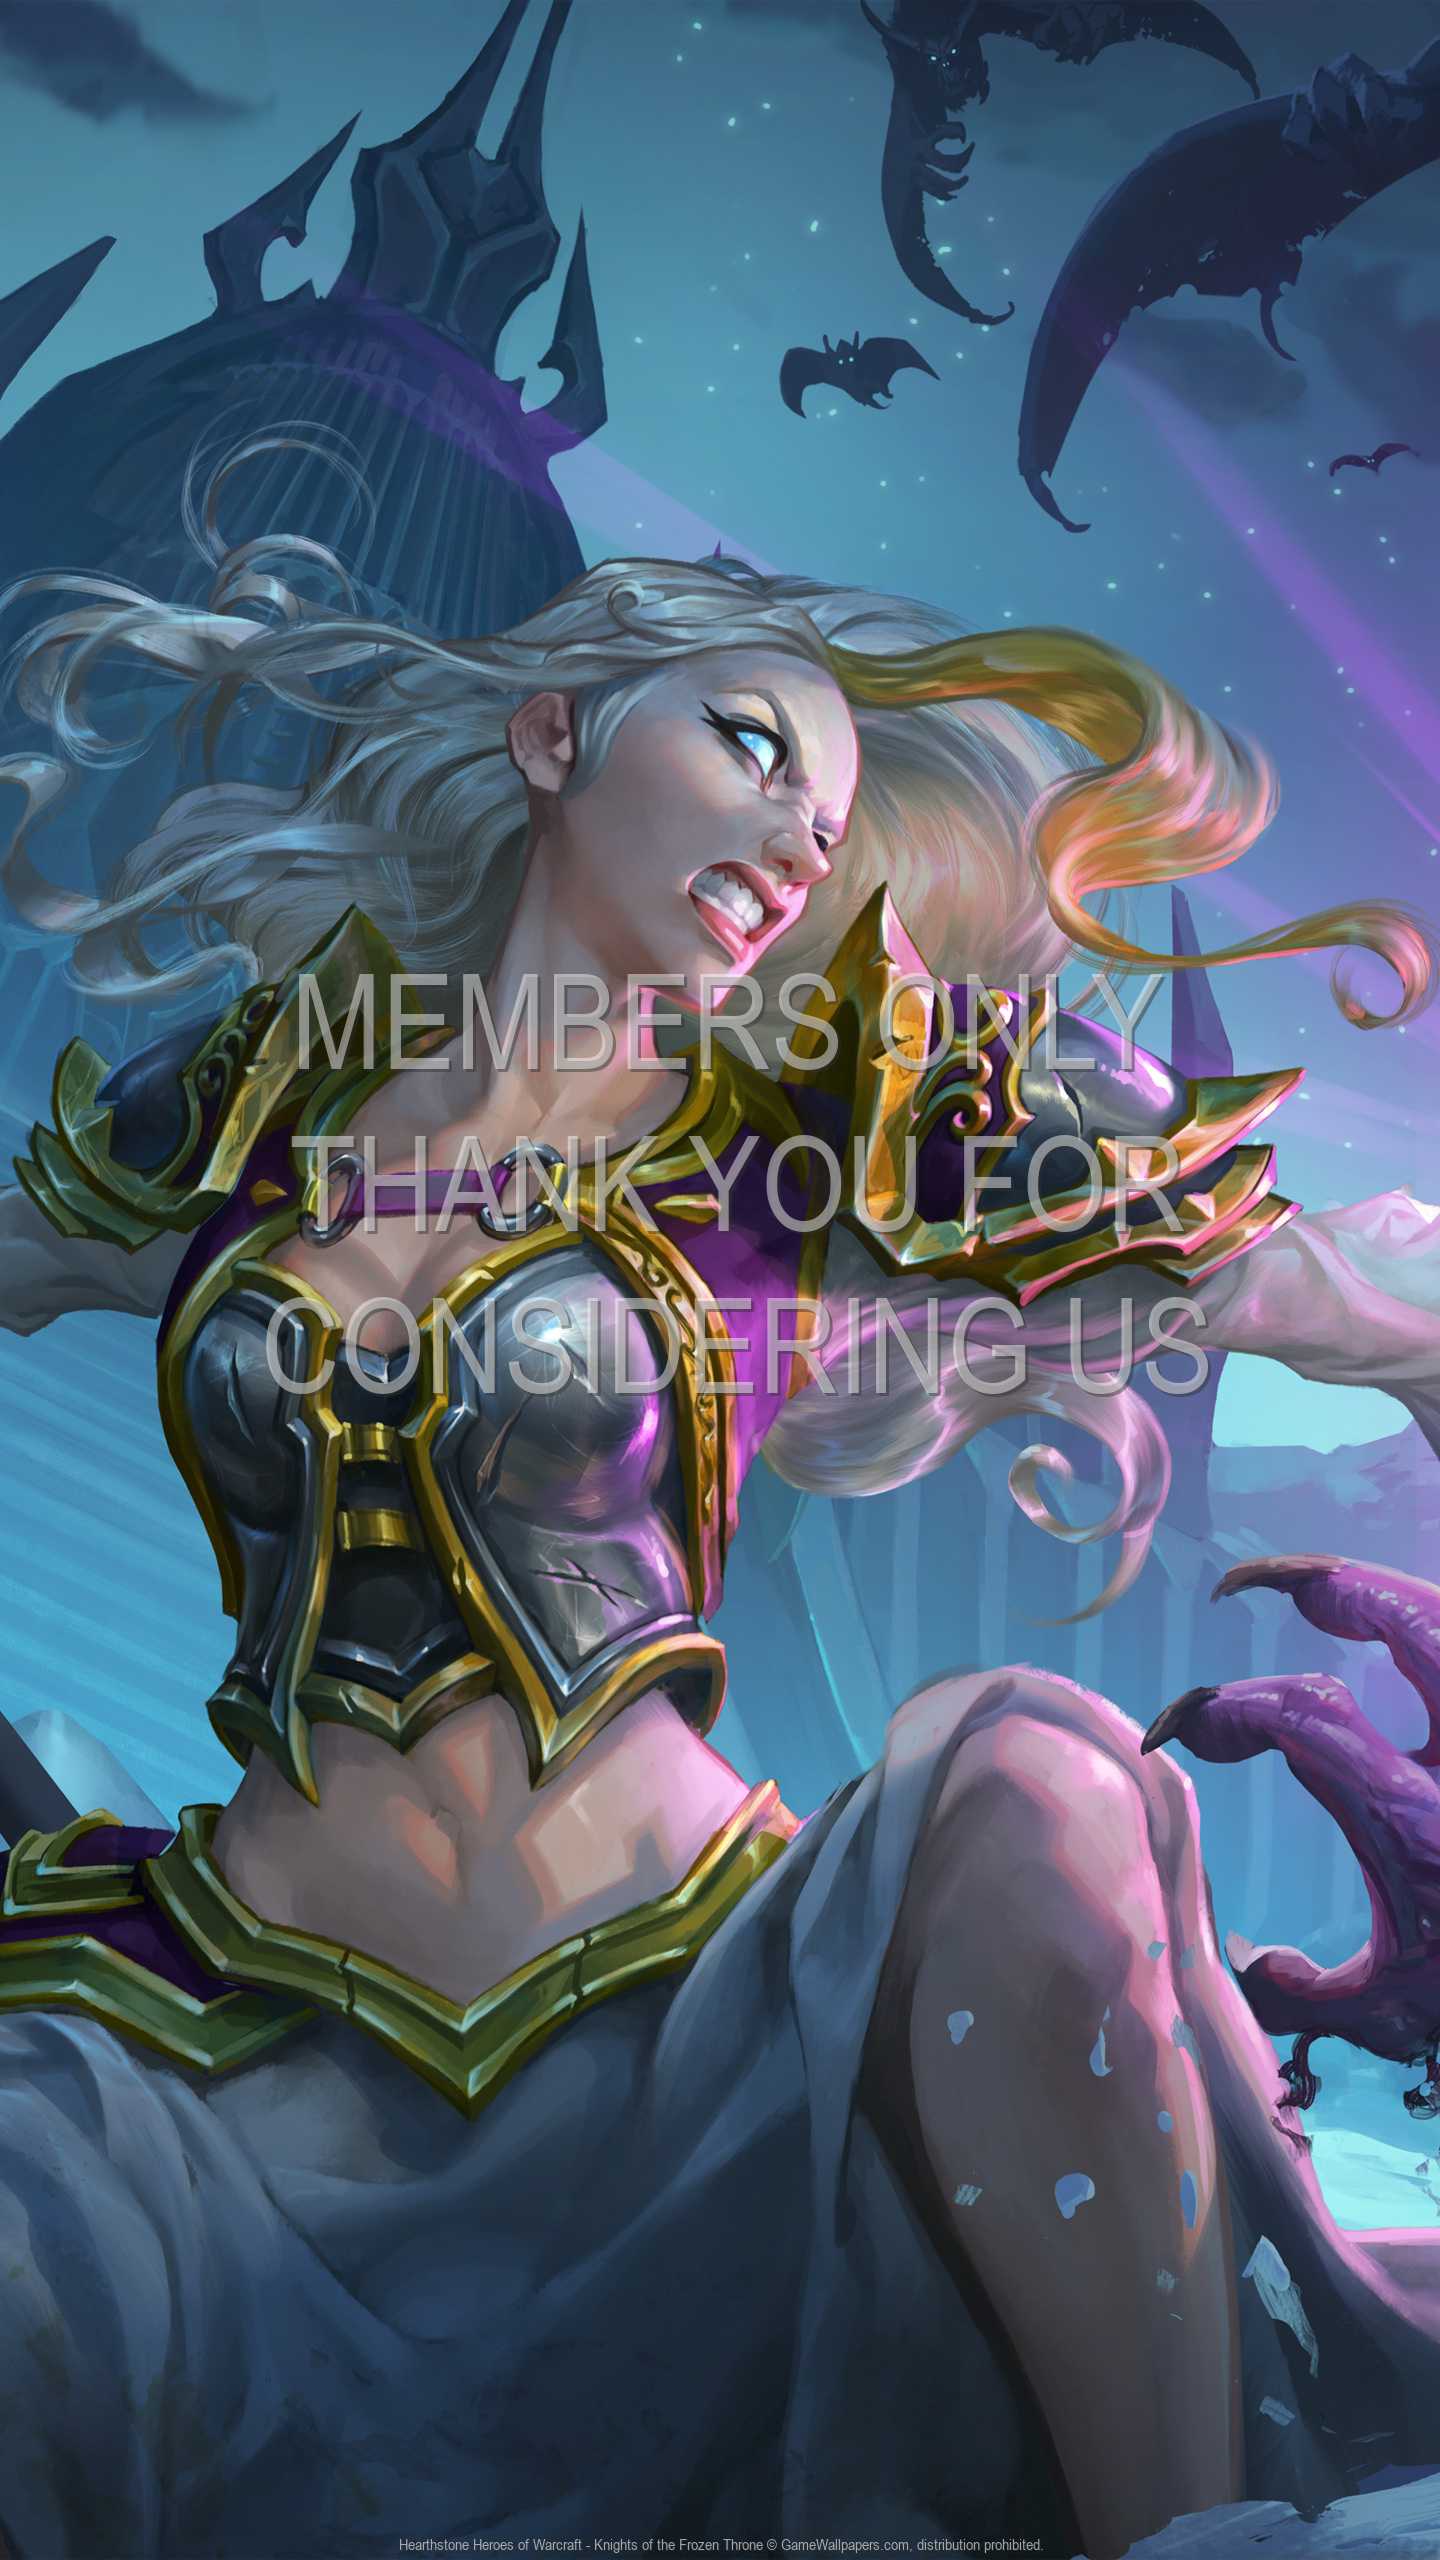 Hearthstone: Heroes of Warcraft - Knights of the Frozen Throne 1440p Vertical Mobile fond d'cran 01